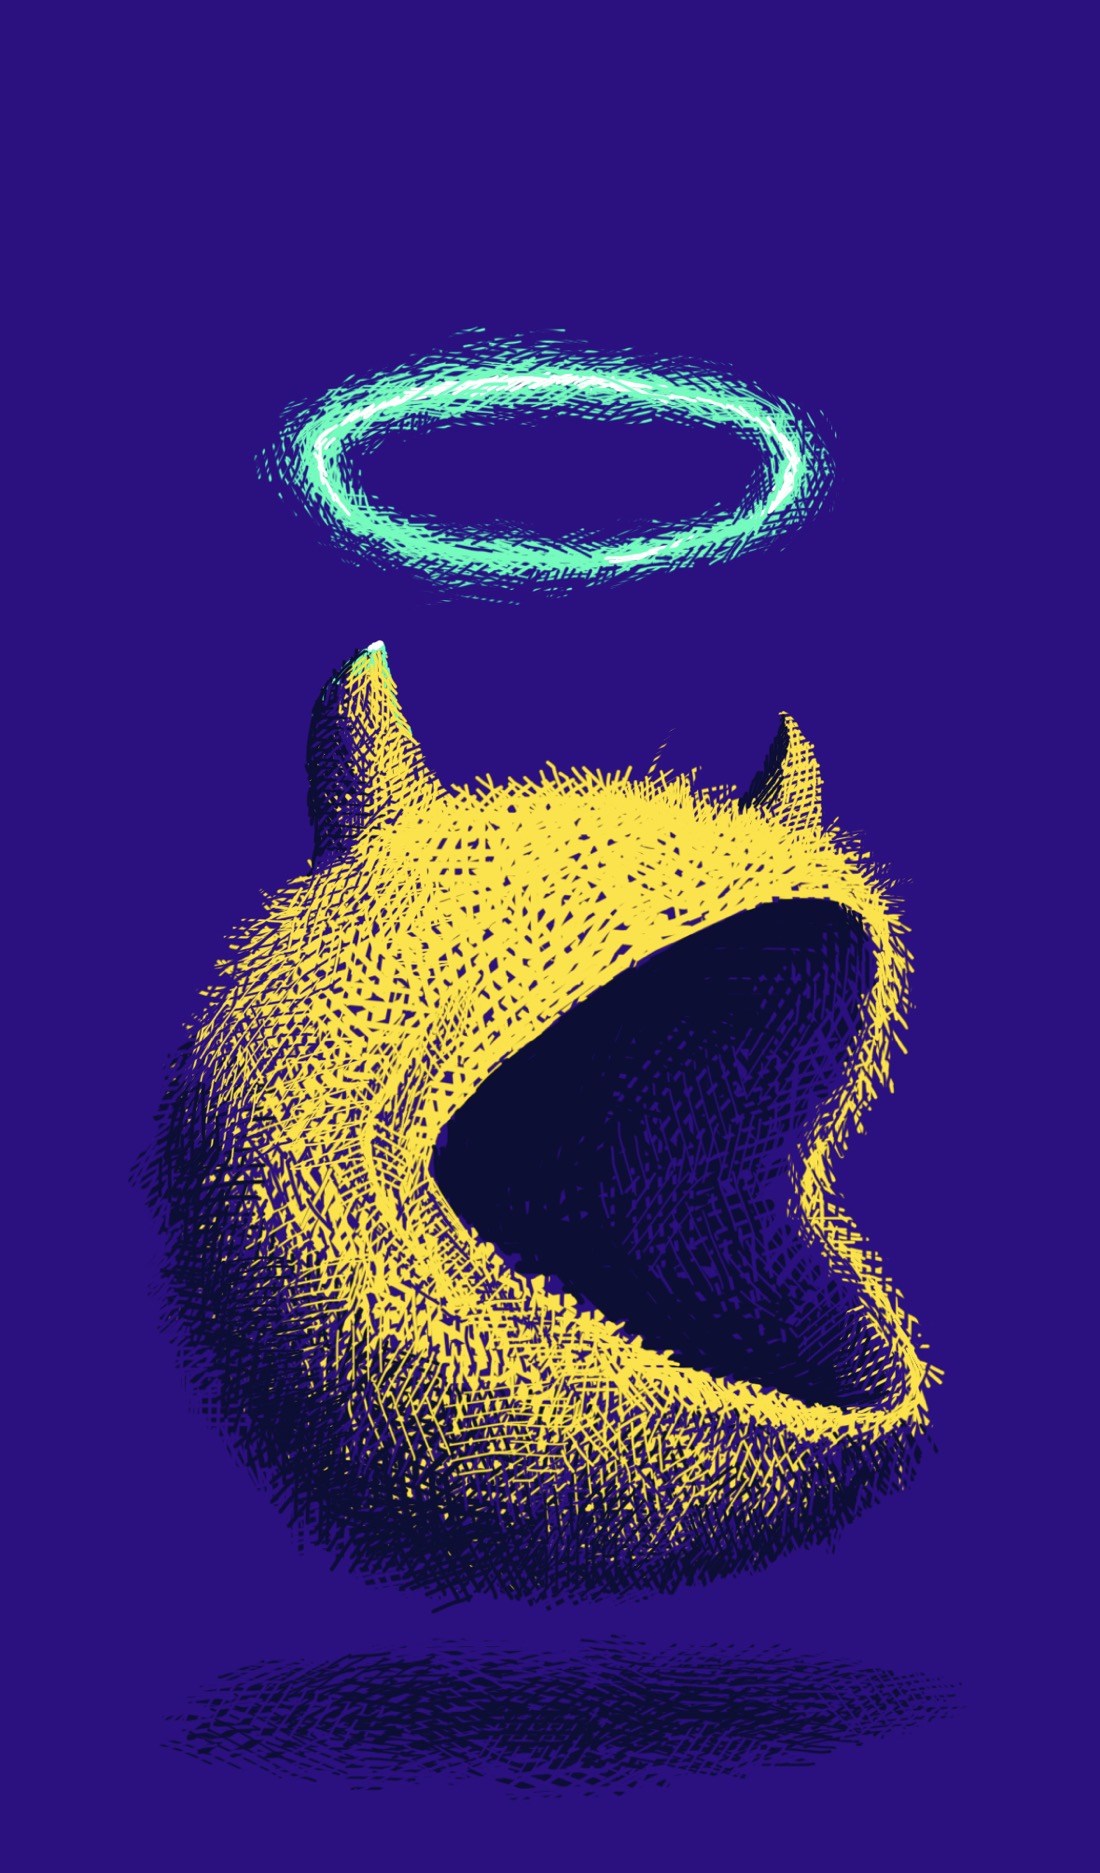 A large, furry, yellow sphere hovering above the ground, set against a dark indigo background. The sphere has no eyes or facial features, only a huge, yawning mouth. Anybody who's played Pac-Man might note a certain similarity. Here, however, is where the similarity ends; the figure also has horns and a phosphor-green halo hovering above it. Pac-Man, it seems, plays both sides.